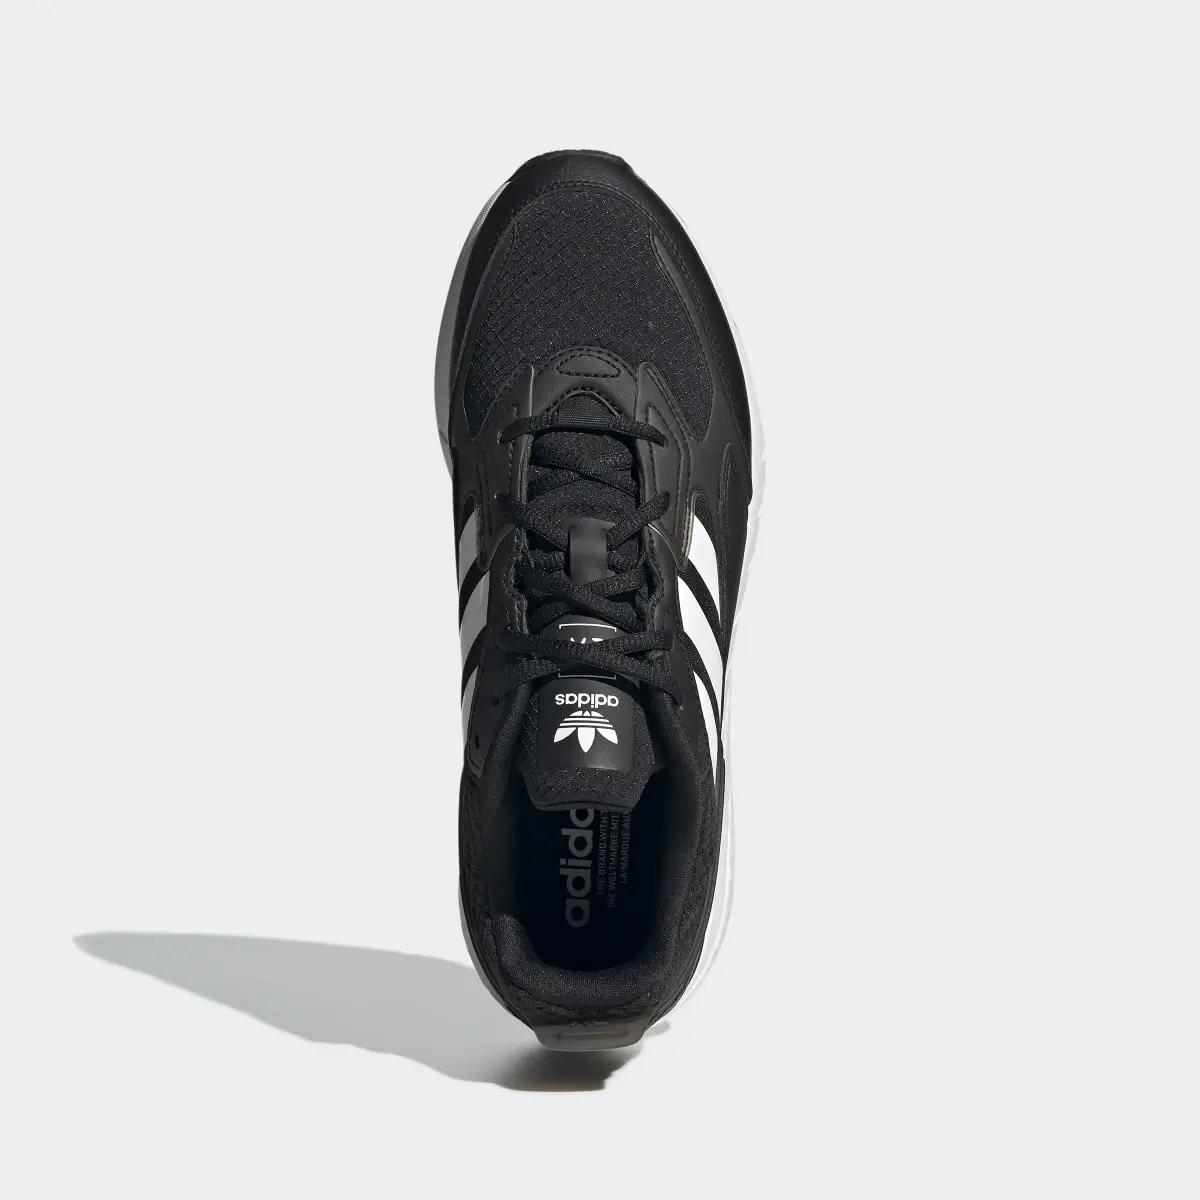 Adidas ZX 1K Boost 2.0 Shoes. 3